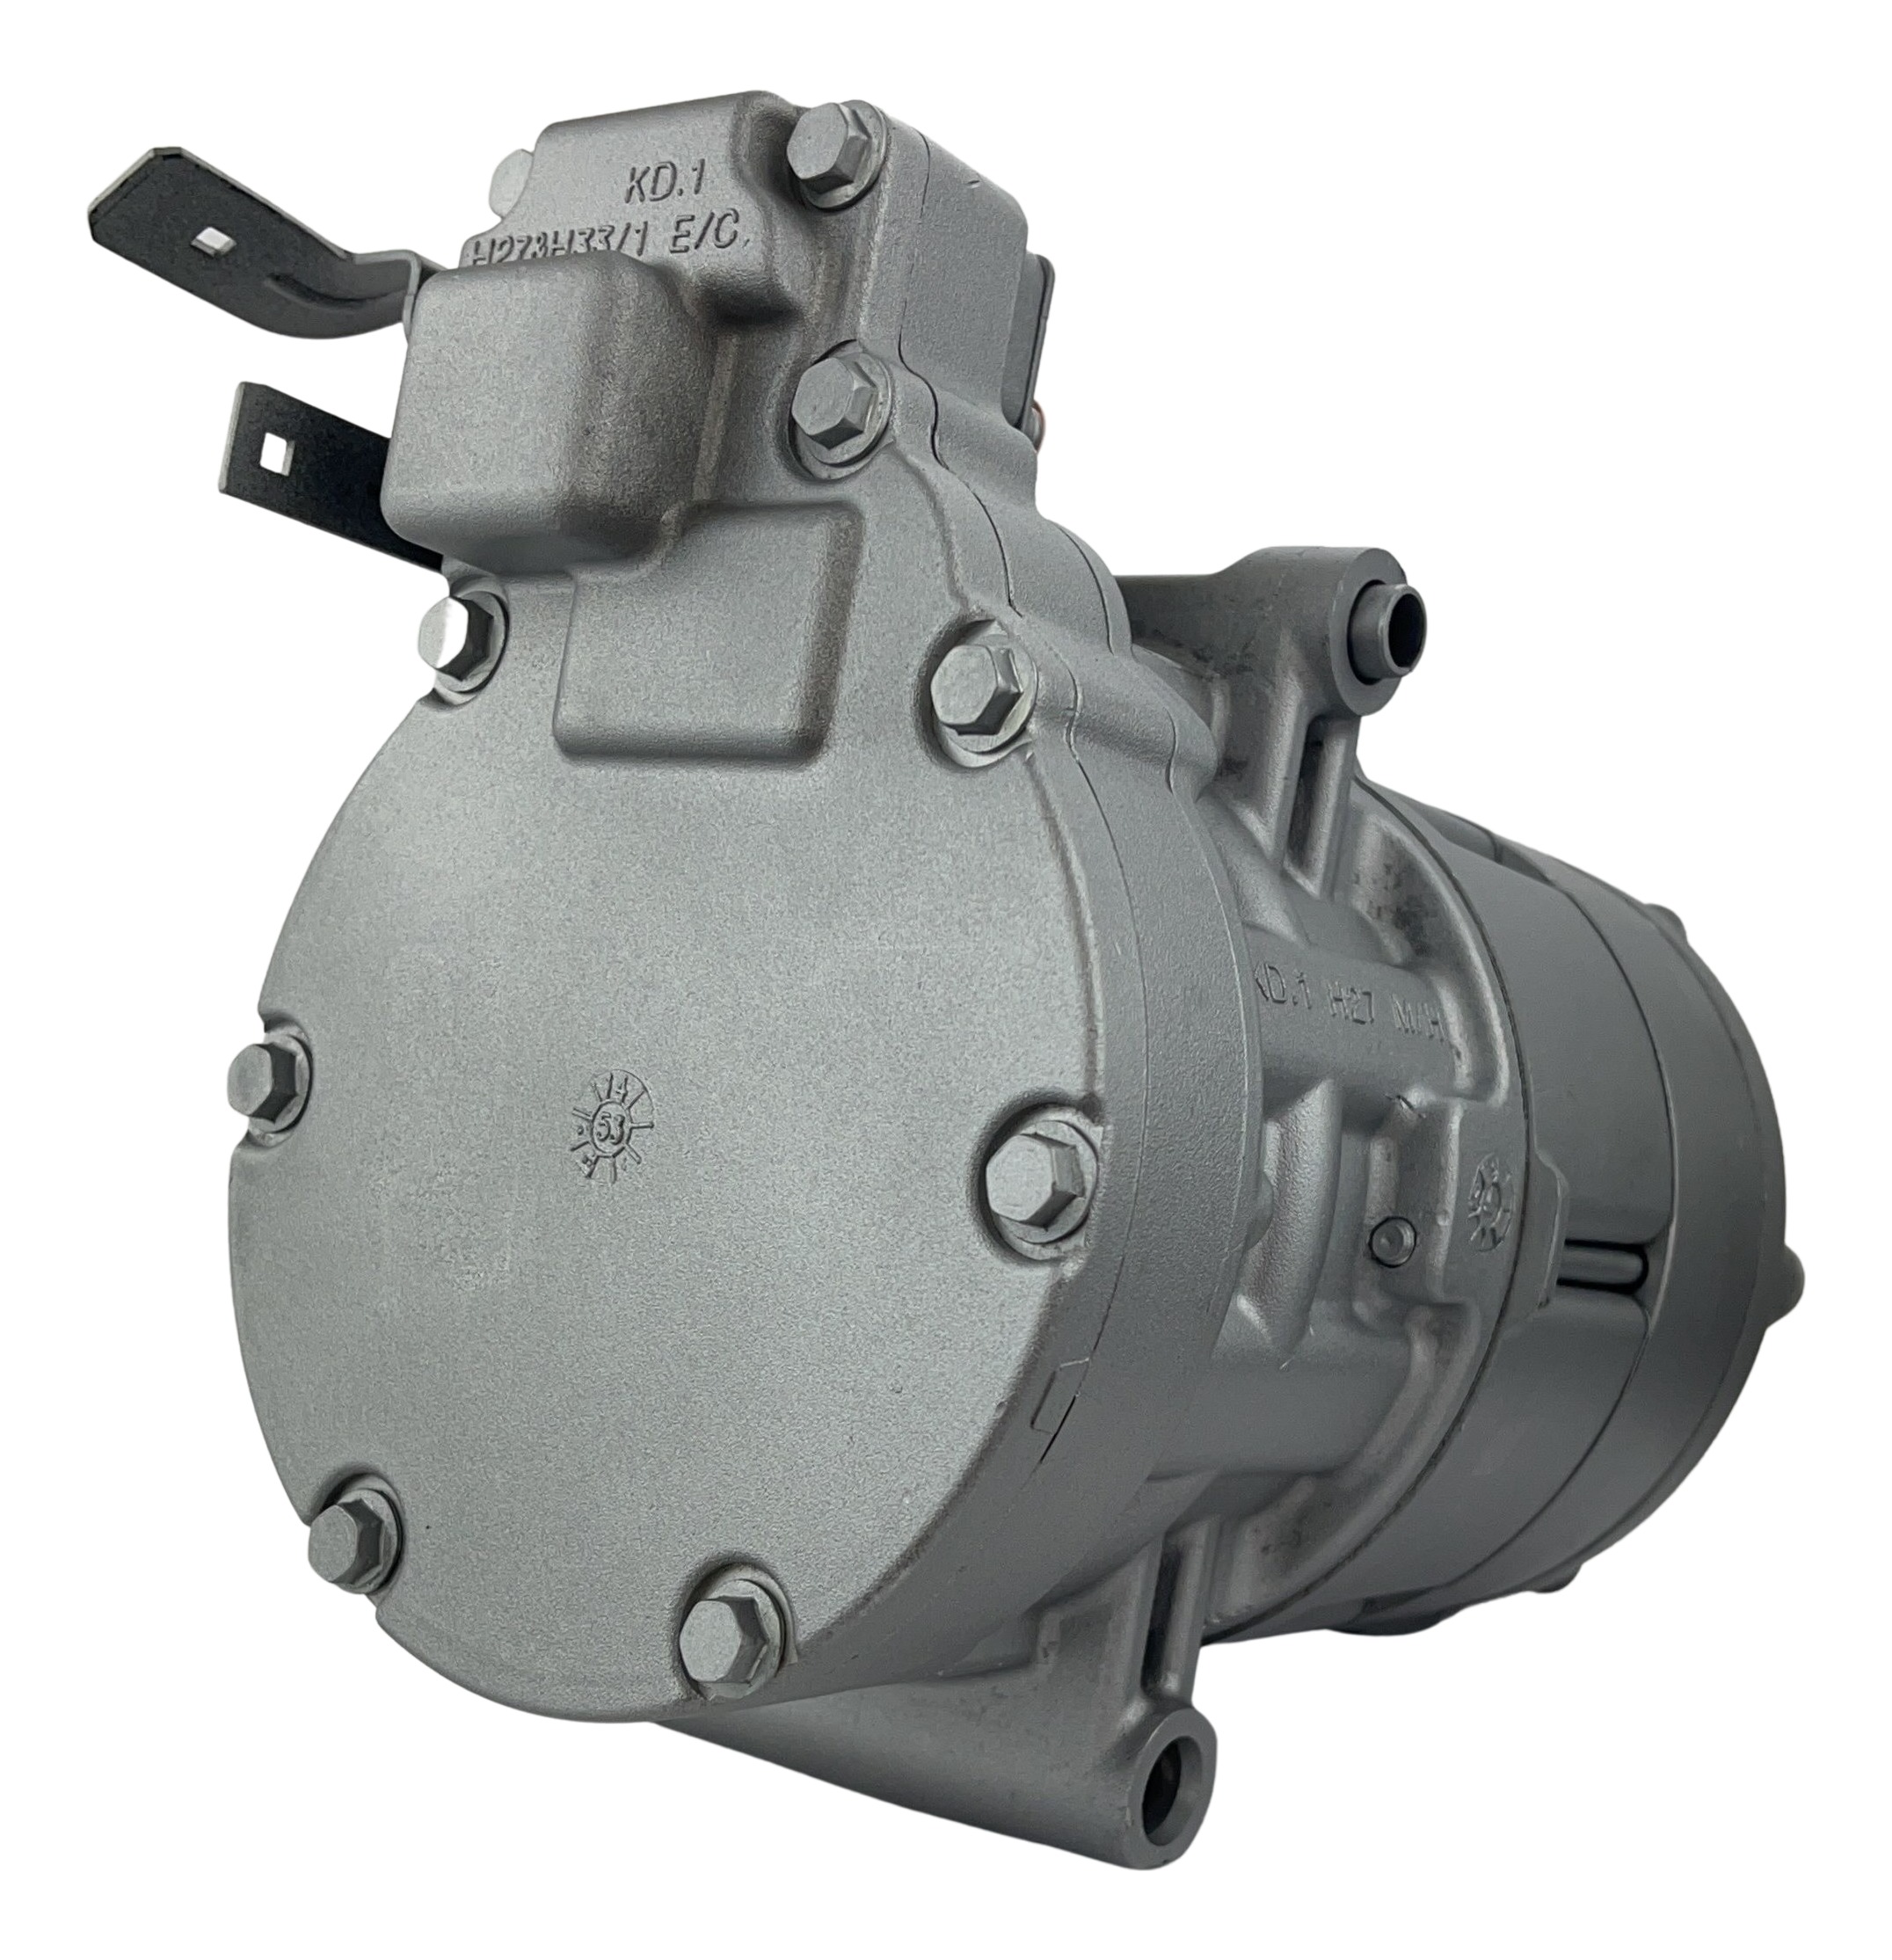 20431.000 Remanufactured A/C Compressor by TCW Product Image field_60b6a13a6e67c